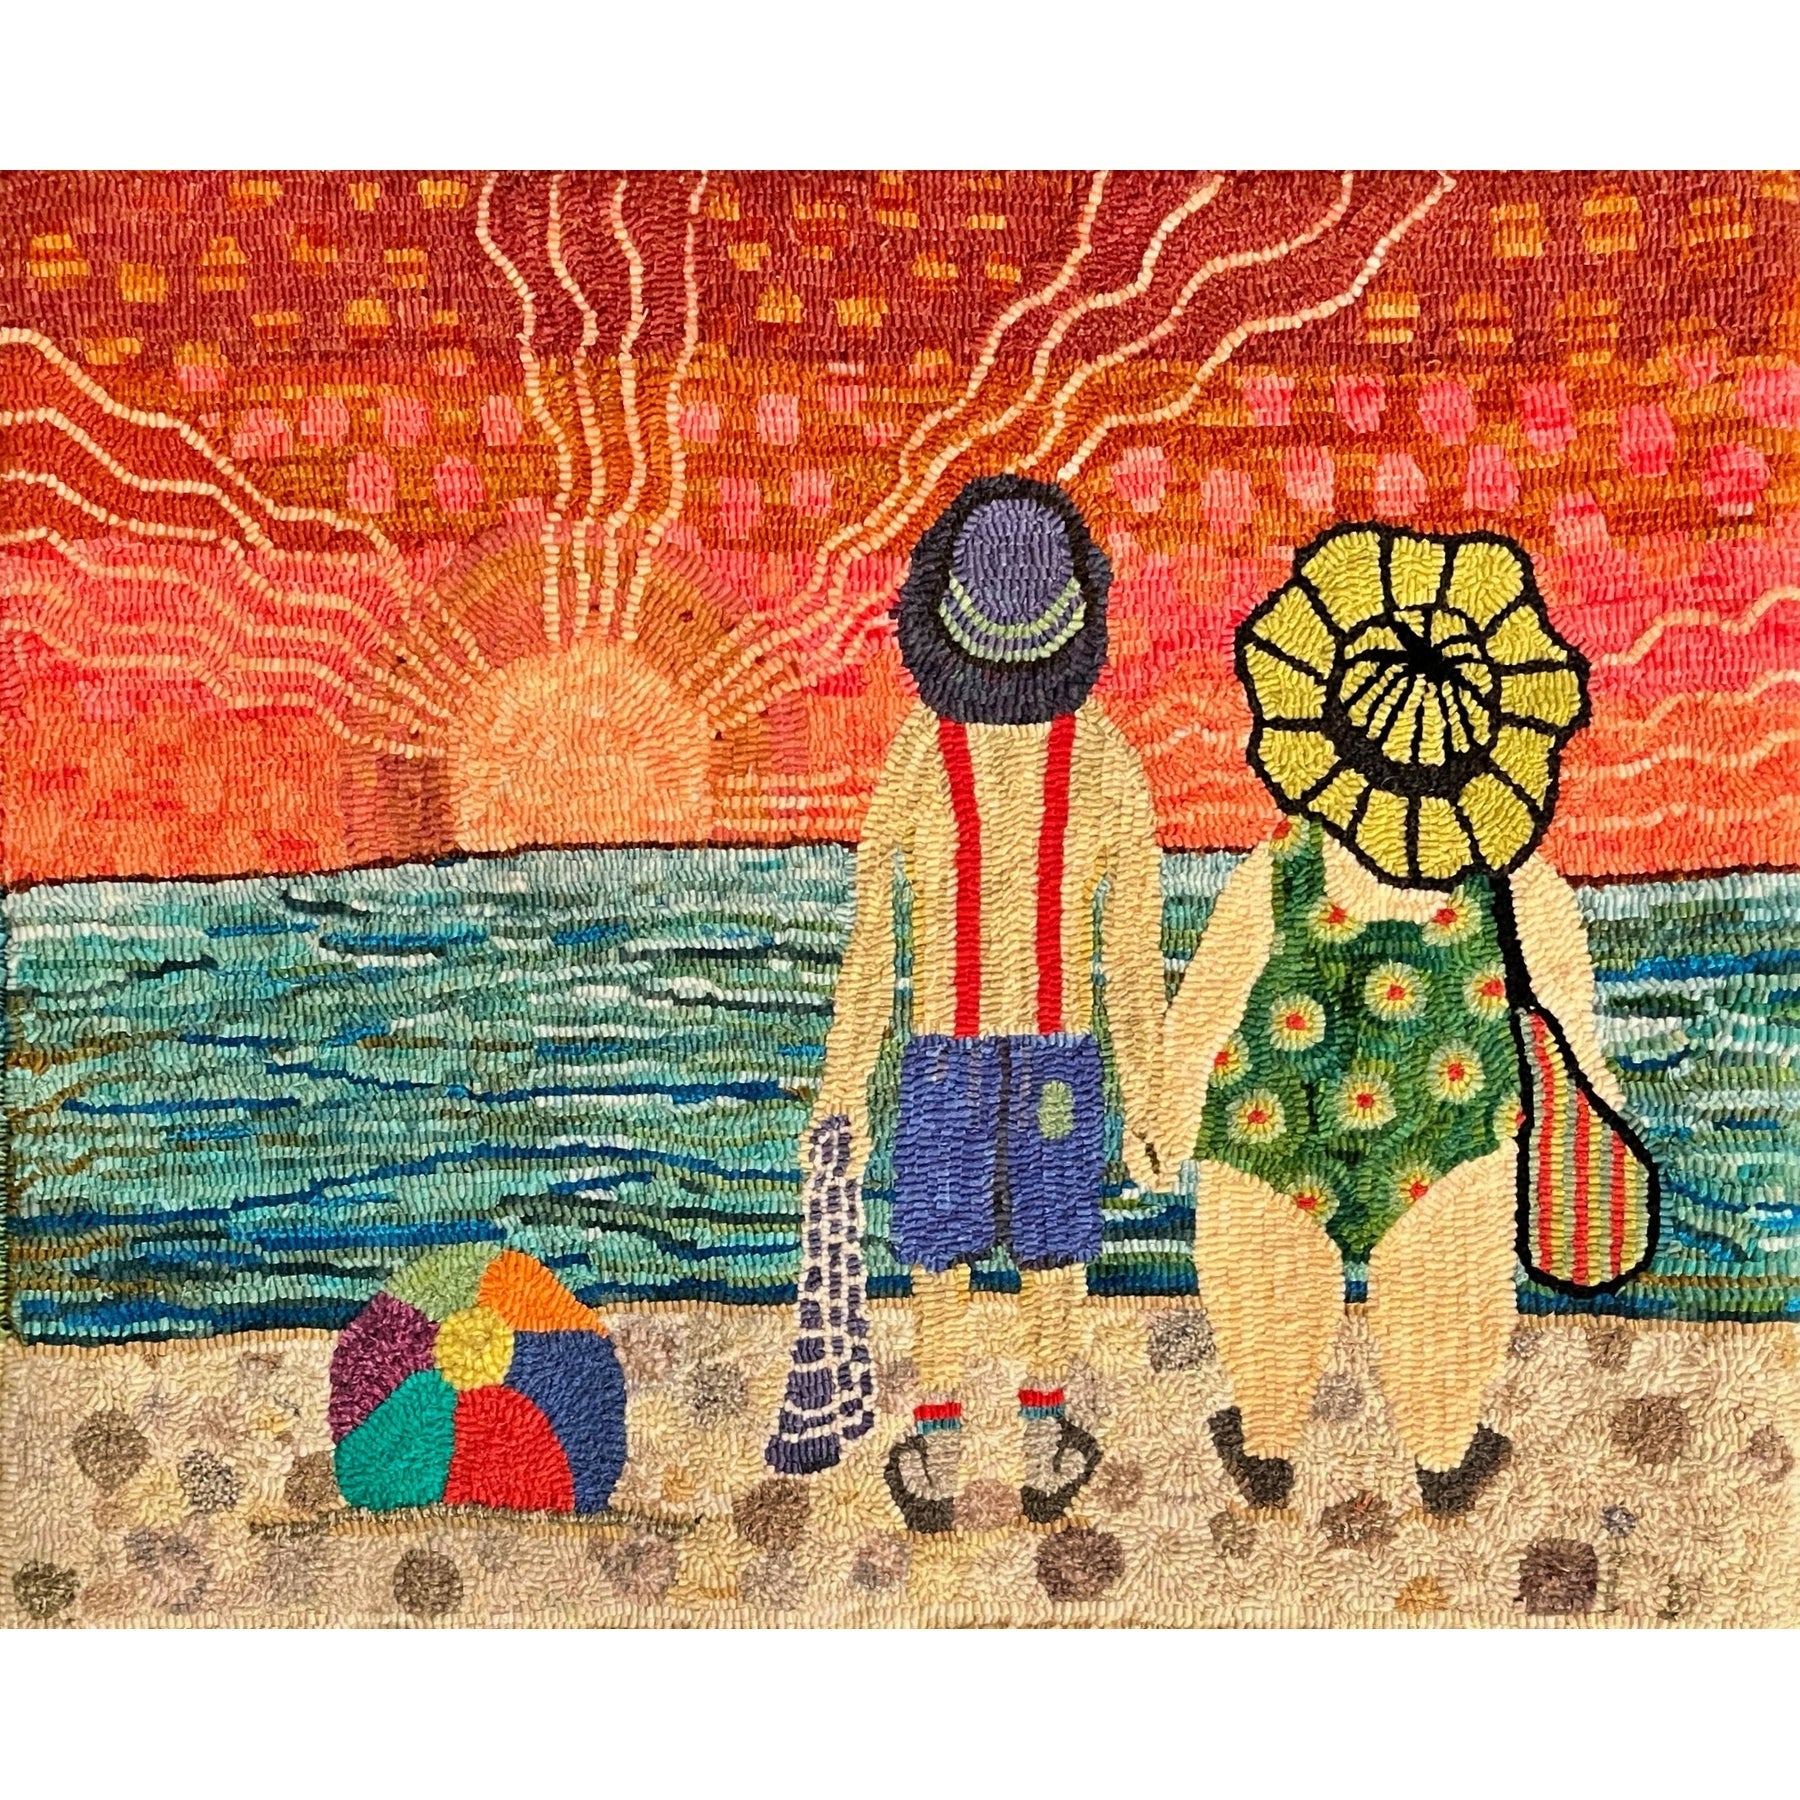 Sunset Moment, rug hooked by Nancy Gingrich